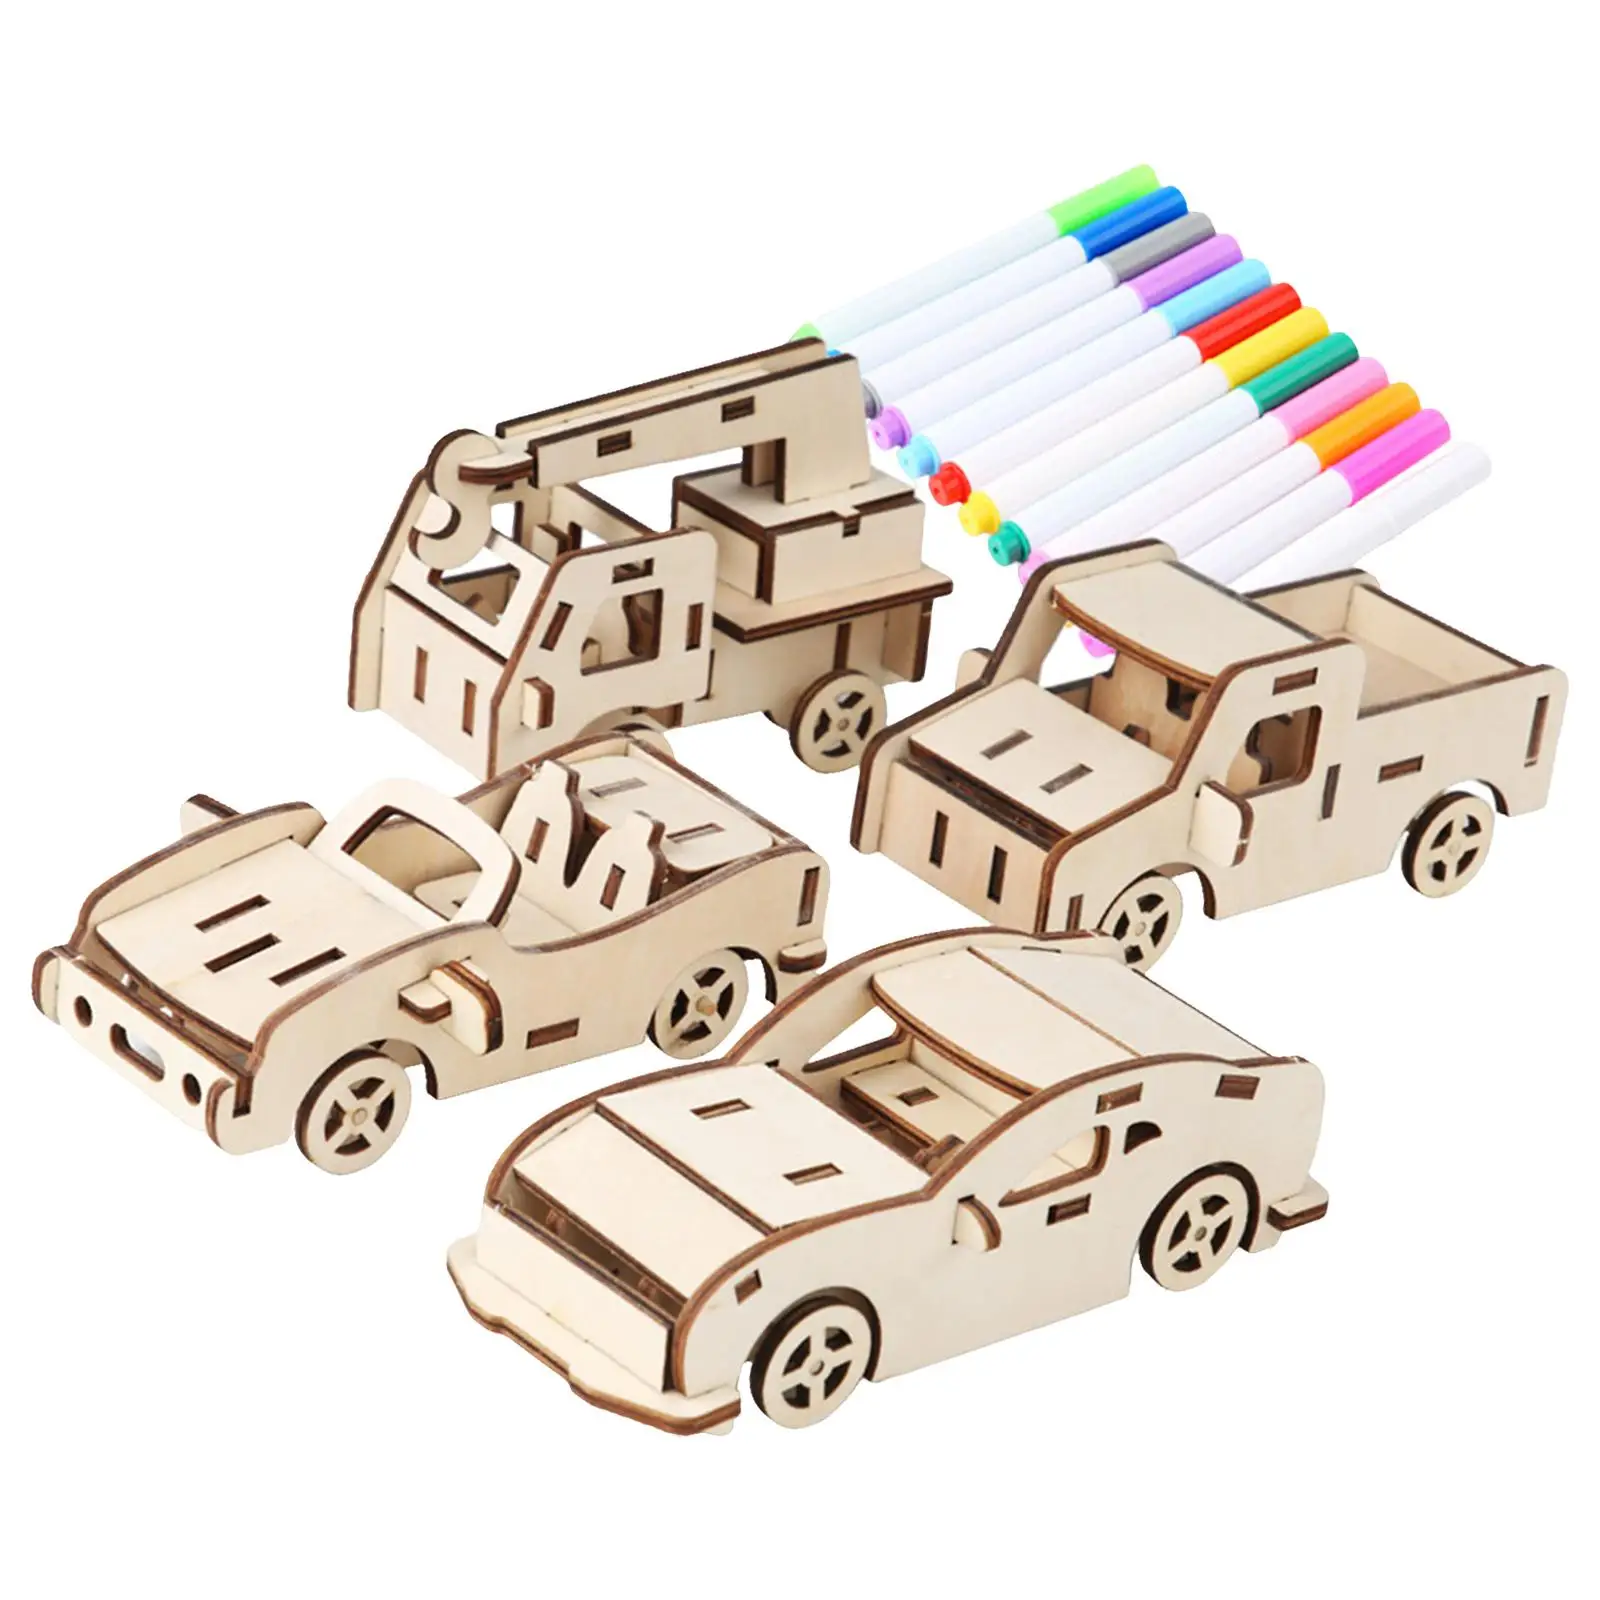 Model Car Kits with Colored Markers Game gifts fun Interaction 4 Pack Unique for Birthday Party childrens Festival Girls Boys